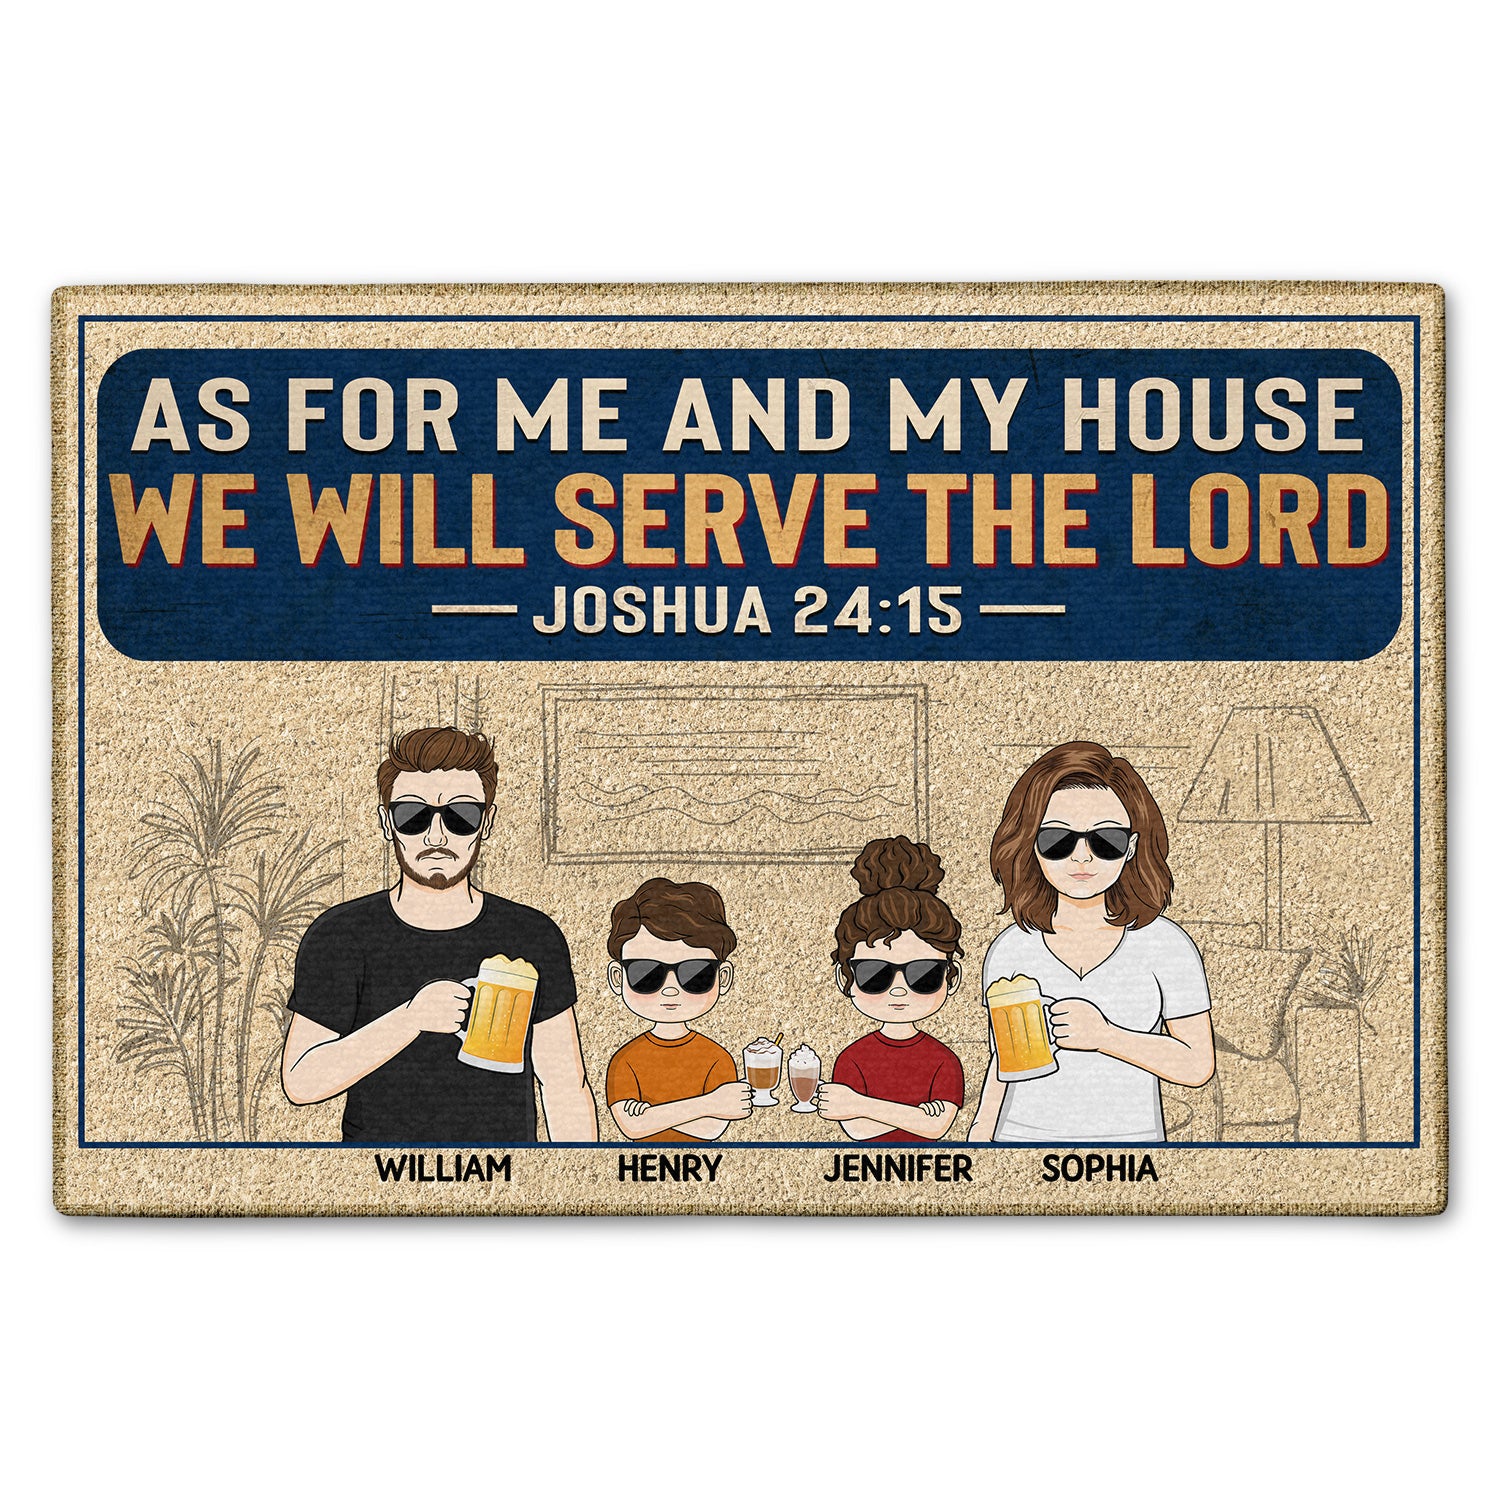 As For Me And My House We Will Serve The Lord - Home Decor, Birthday Gift For Couples, Husband, Wife, Family - Personalized Custom Doormat